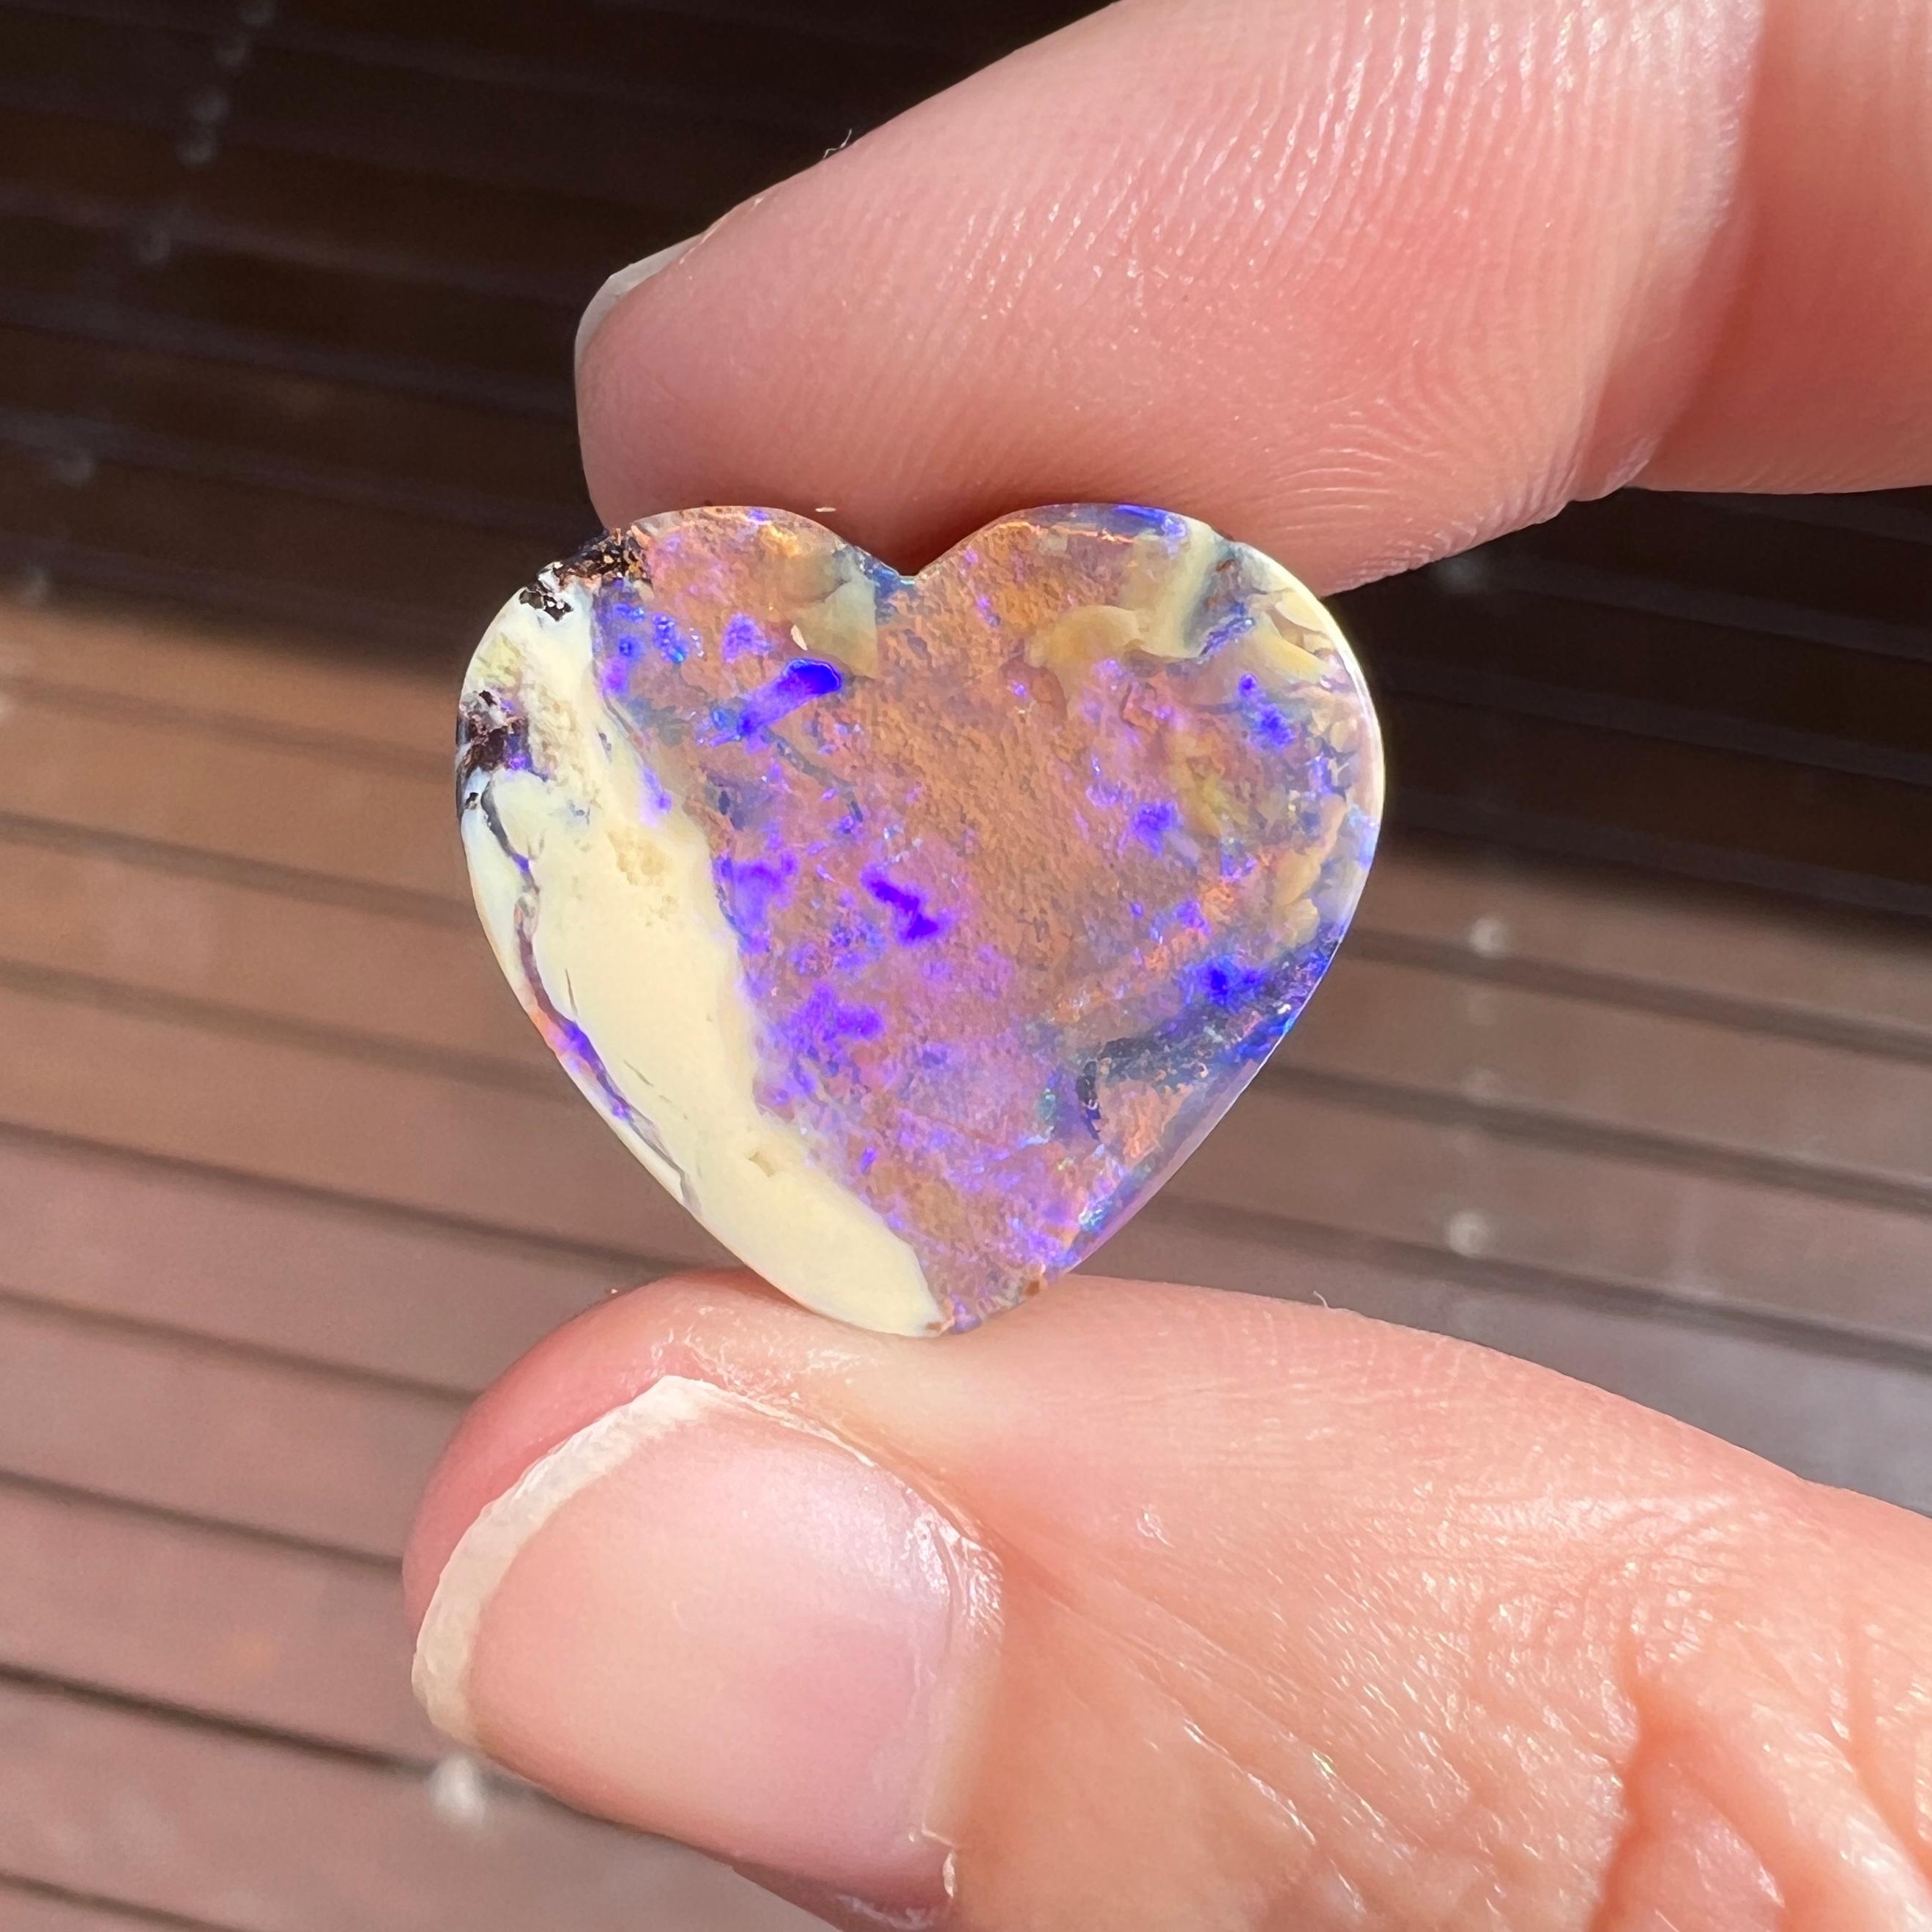 This beautiful 12.54 Ct Australian boulder opal was mined by Sue Cooper at her Yaraka opal mine in western Queensland, Australia in 2021. Sue processed the rough opal herself and cut into into an large heart shape. We especially love the flashy